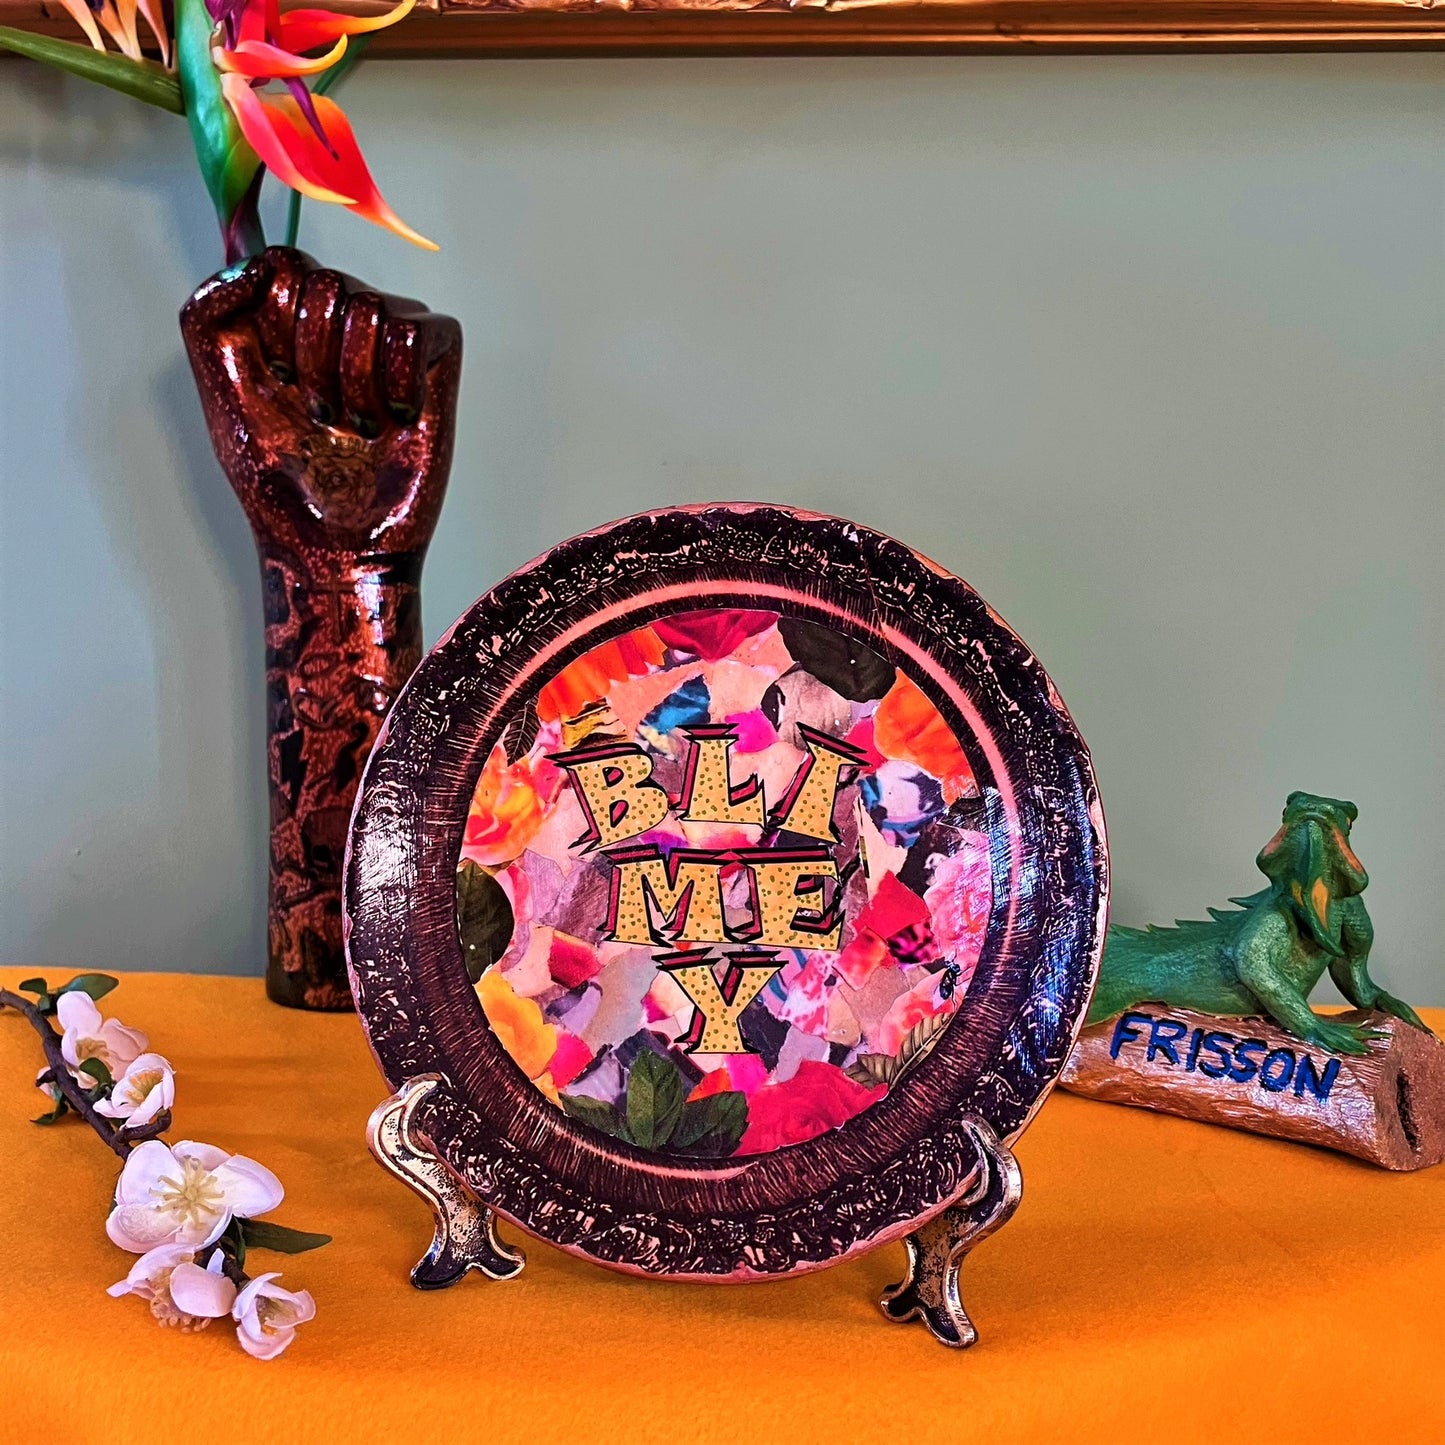 "Blimey" Wall Plate by House of Frisson, featuring a collage of word "blimey" framed with a vintage looking frame, with colourful background. Plate on a plate stand, resting on a table.